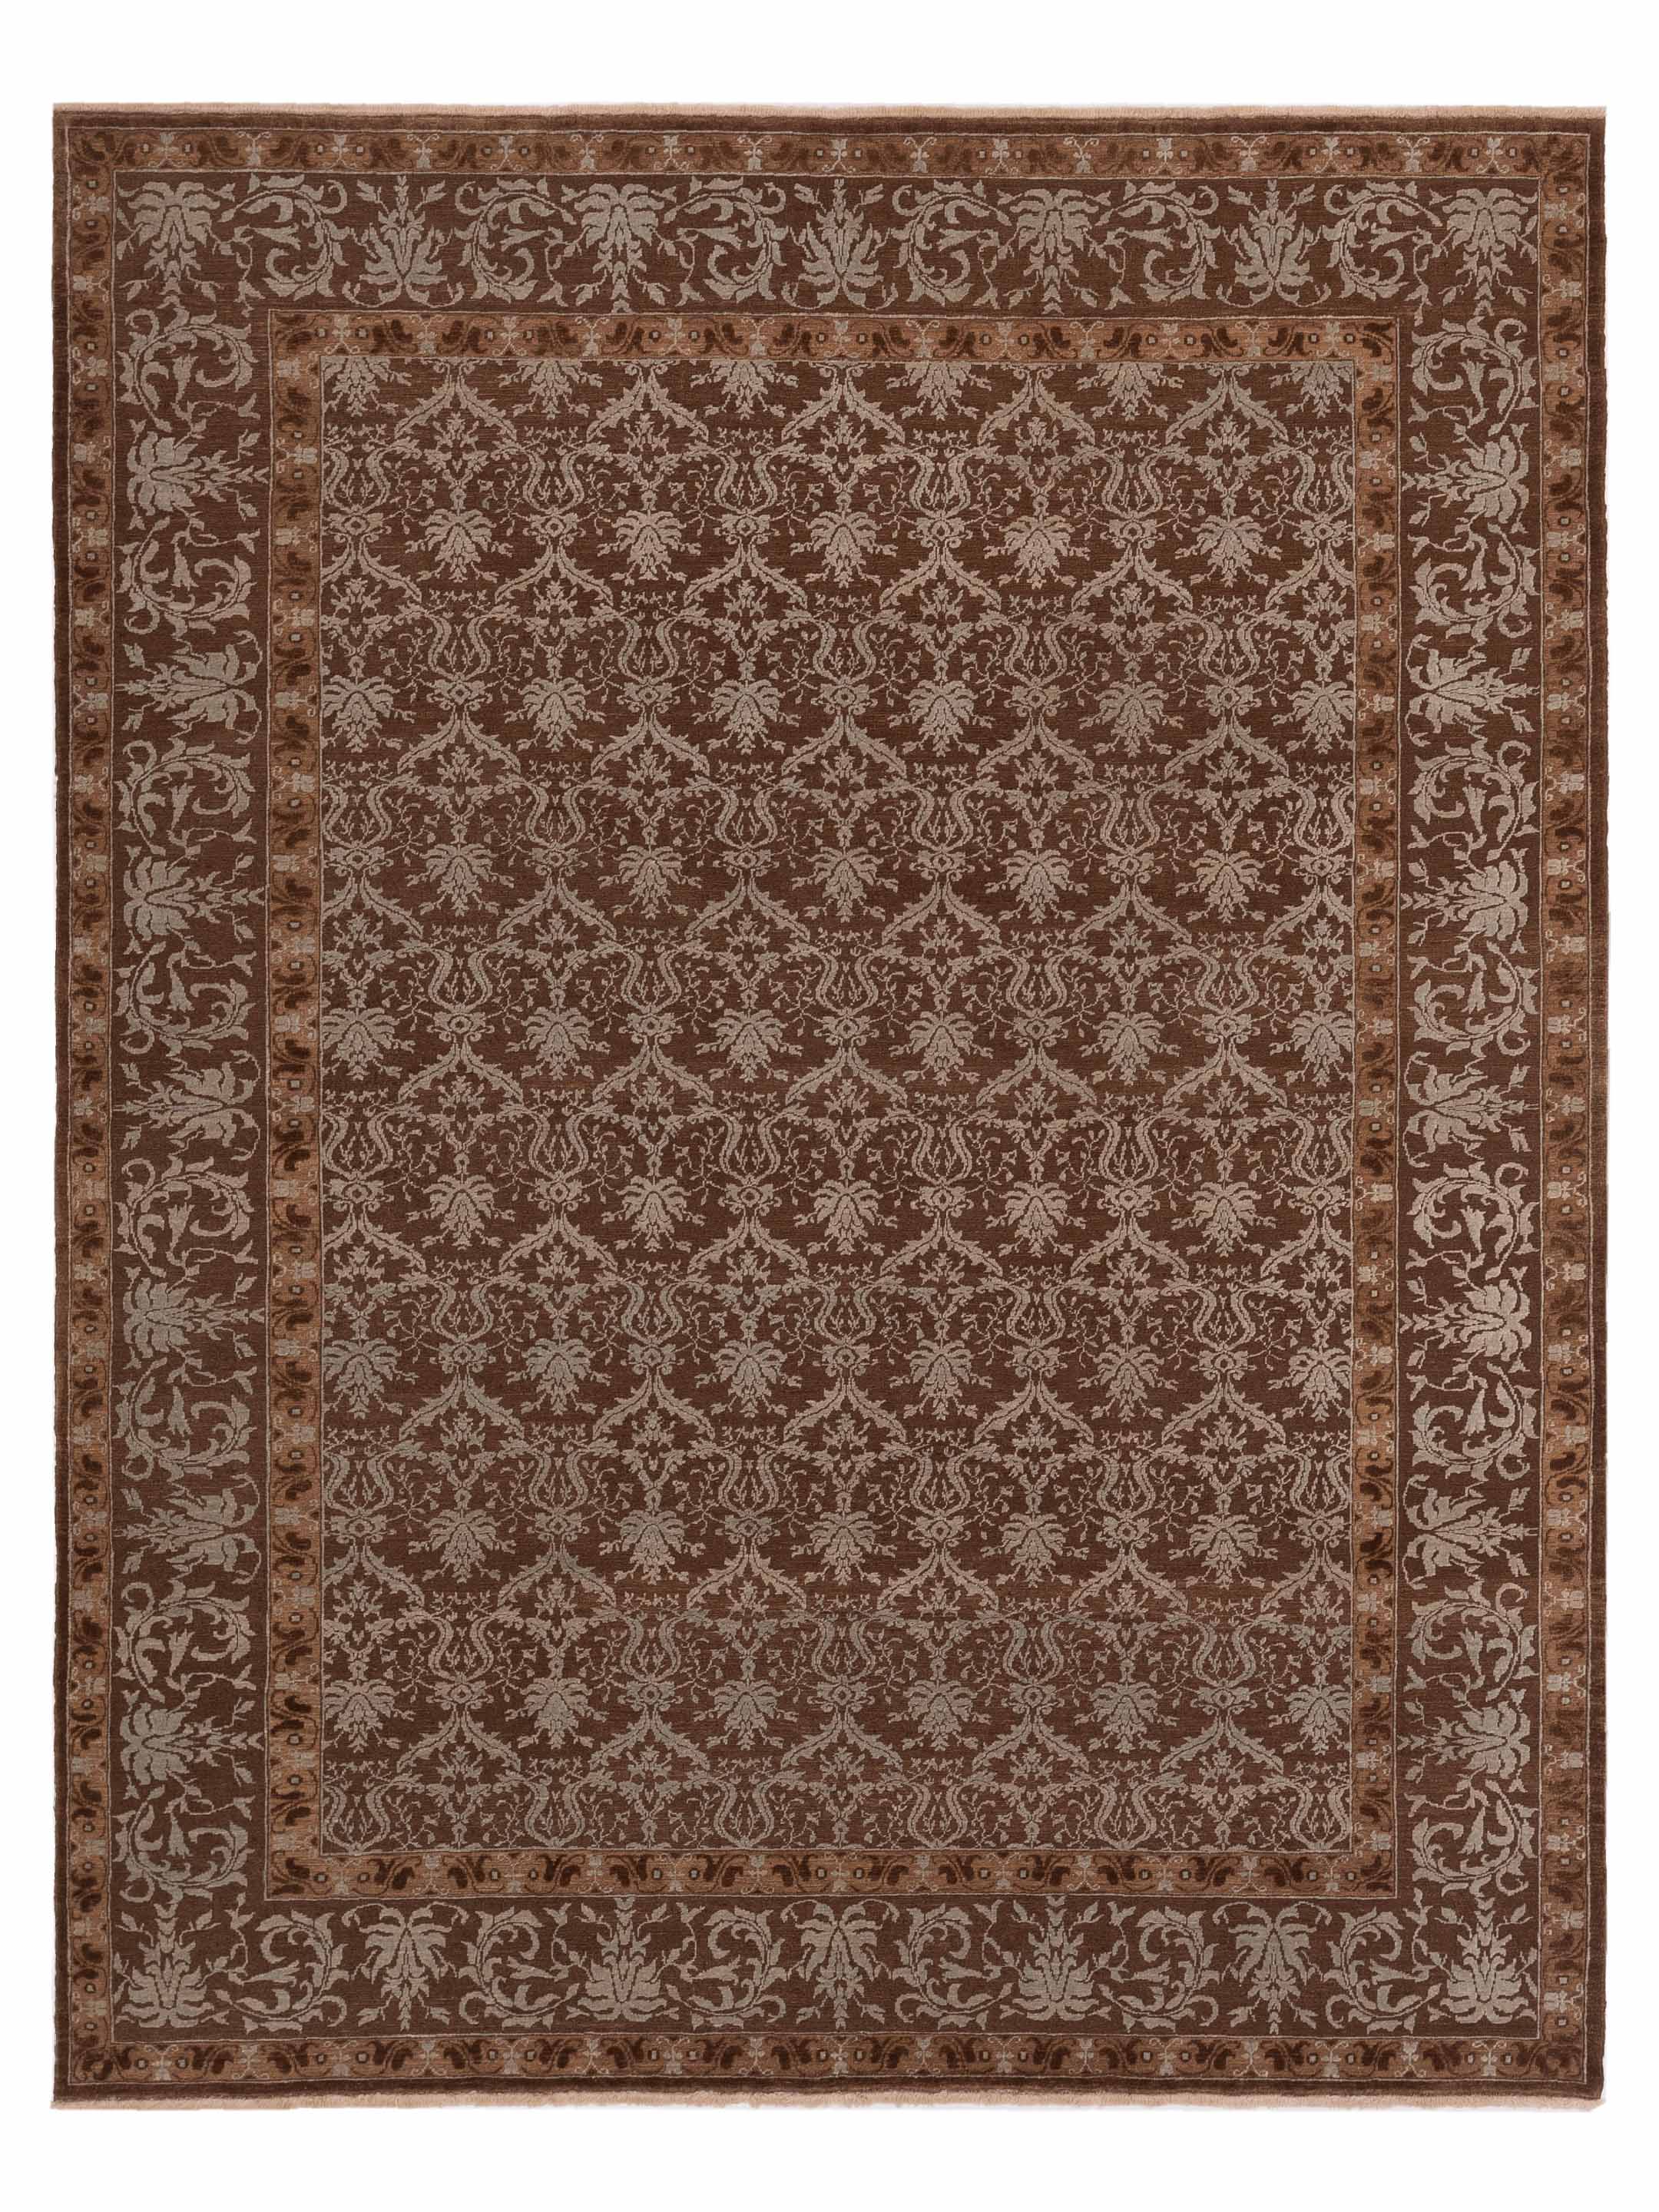 Transitional Brown Area Rug	